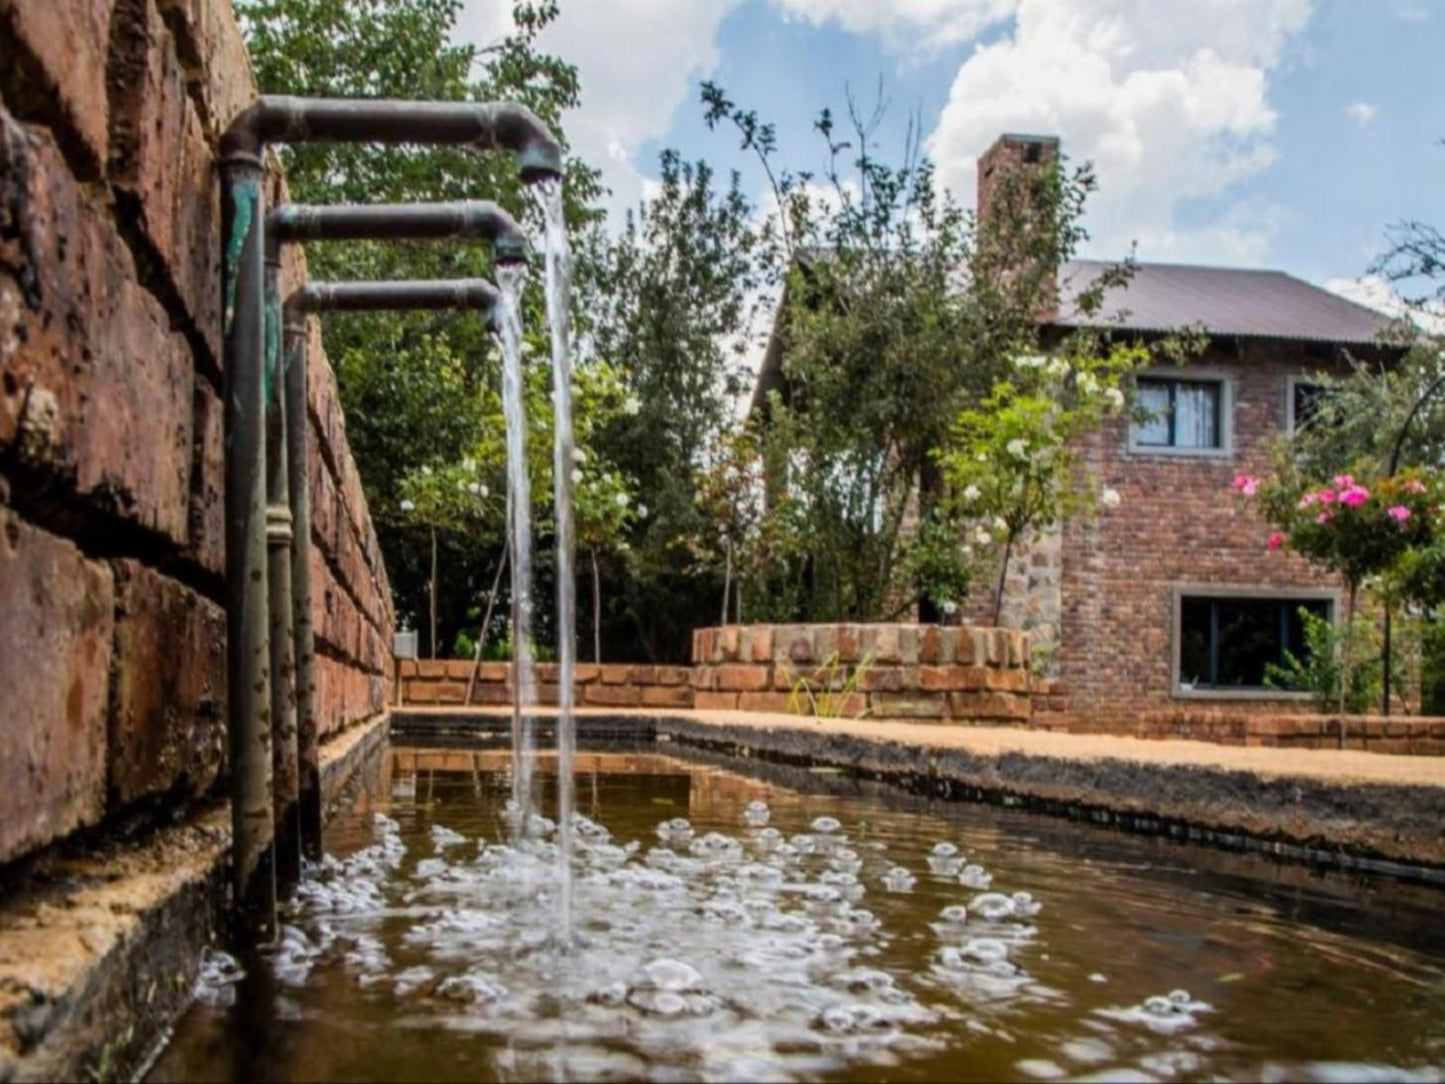 Tarry Stone Cottages Dullstroom Mpumalanga South Africa House, Building, Architecture, River, Nature, Waters